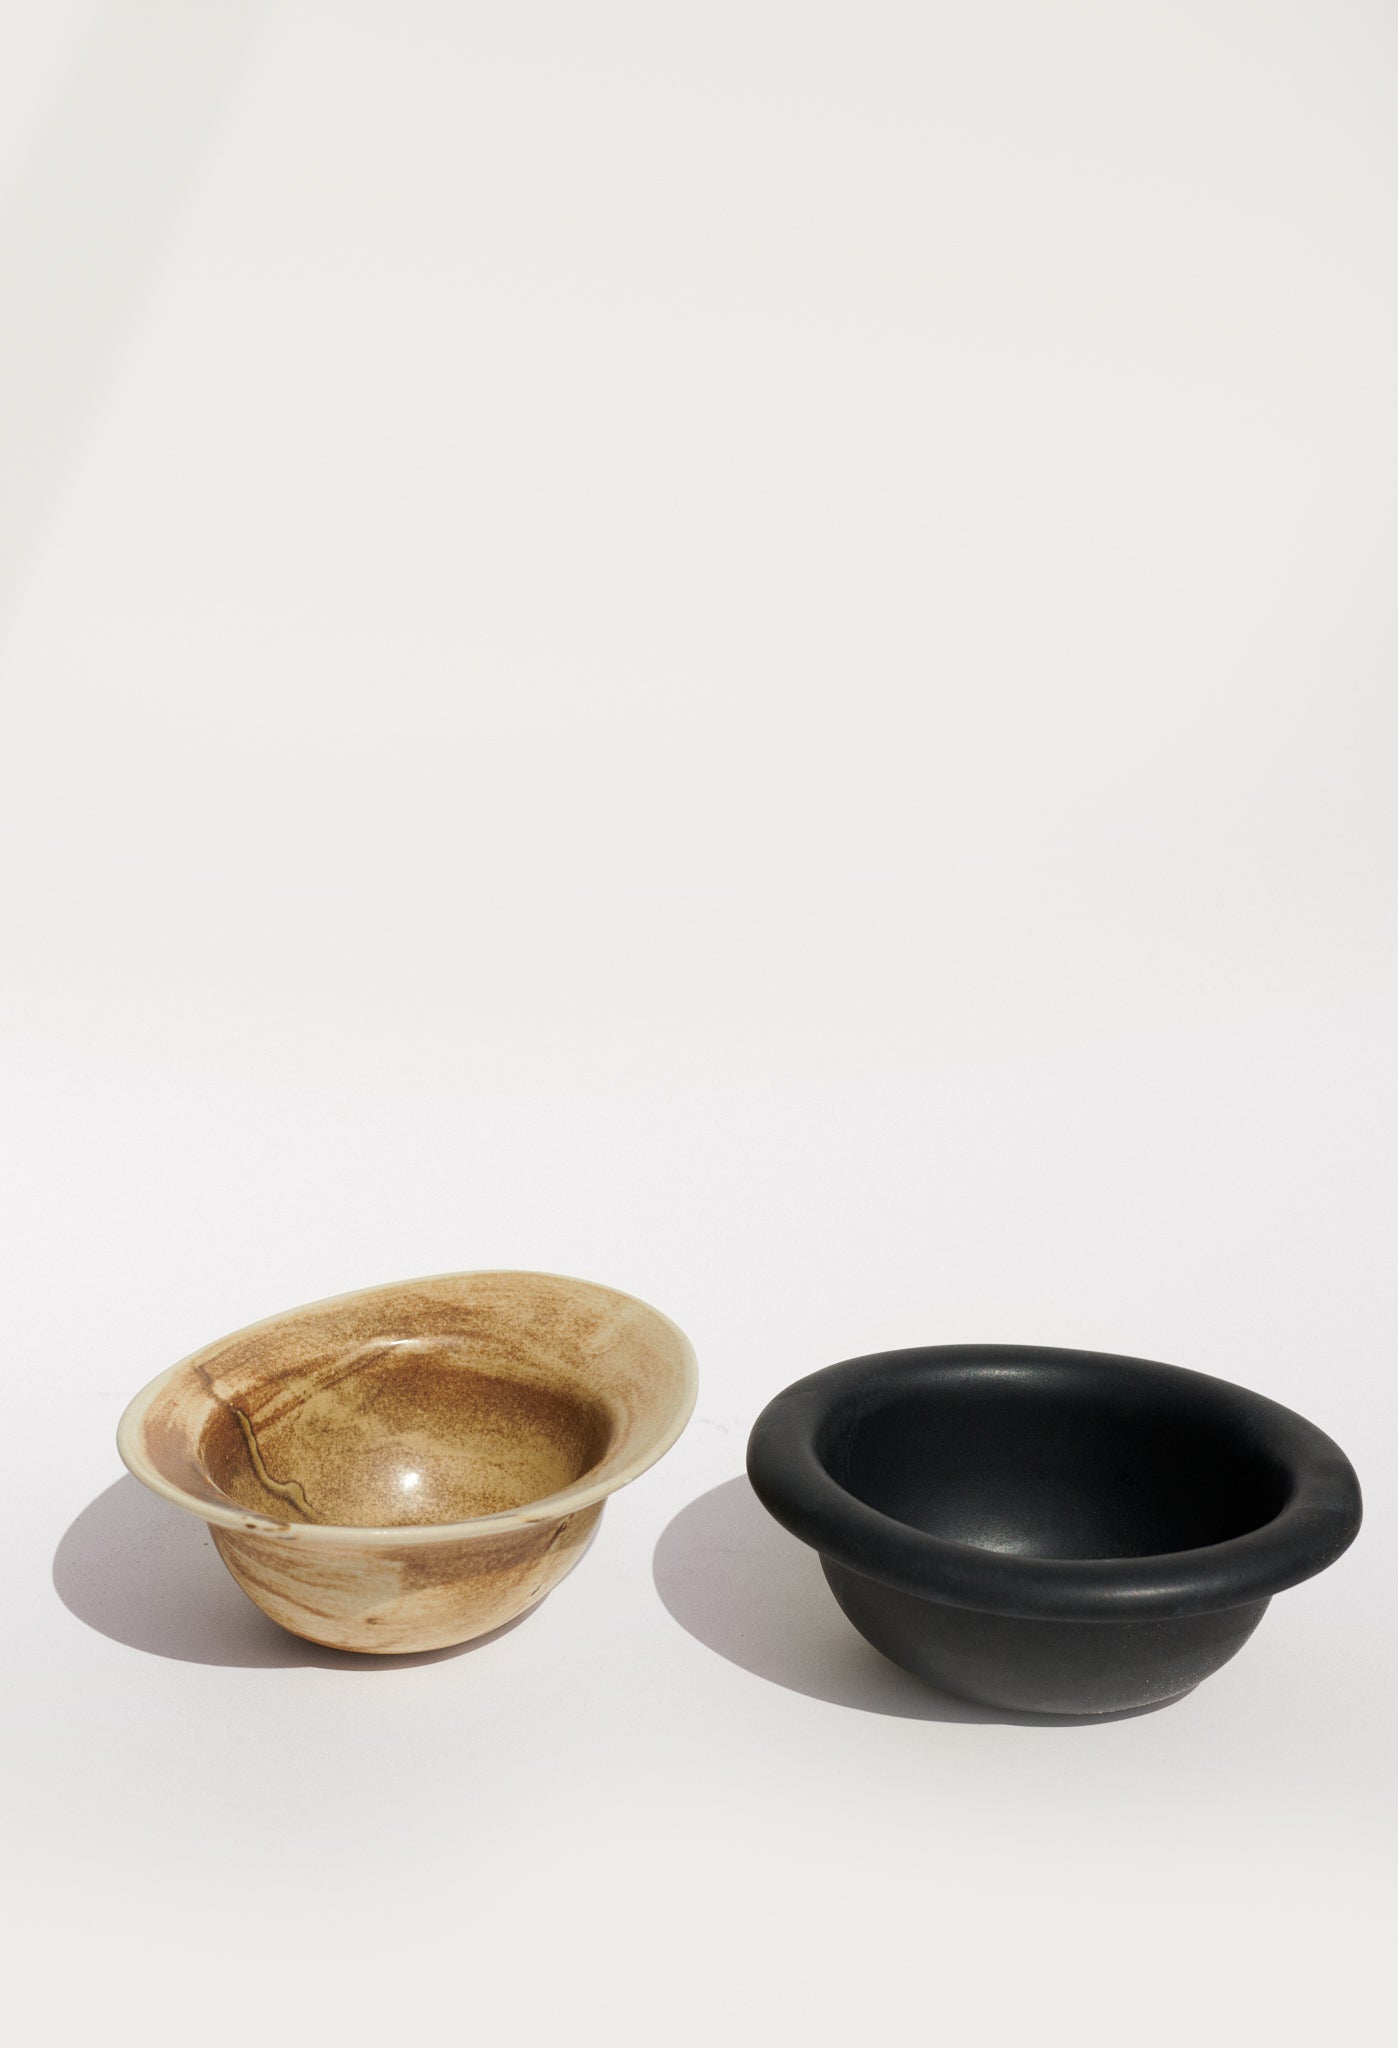 Set of 2 bowls "Bad Manners"